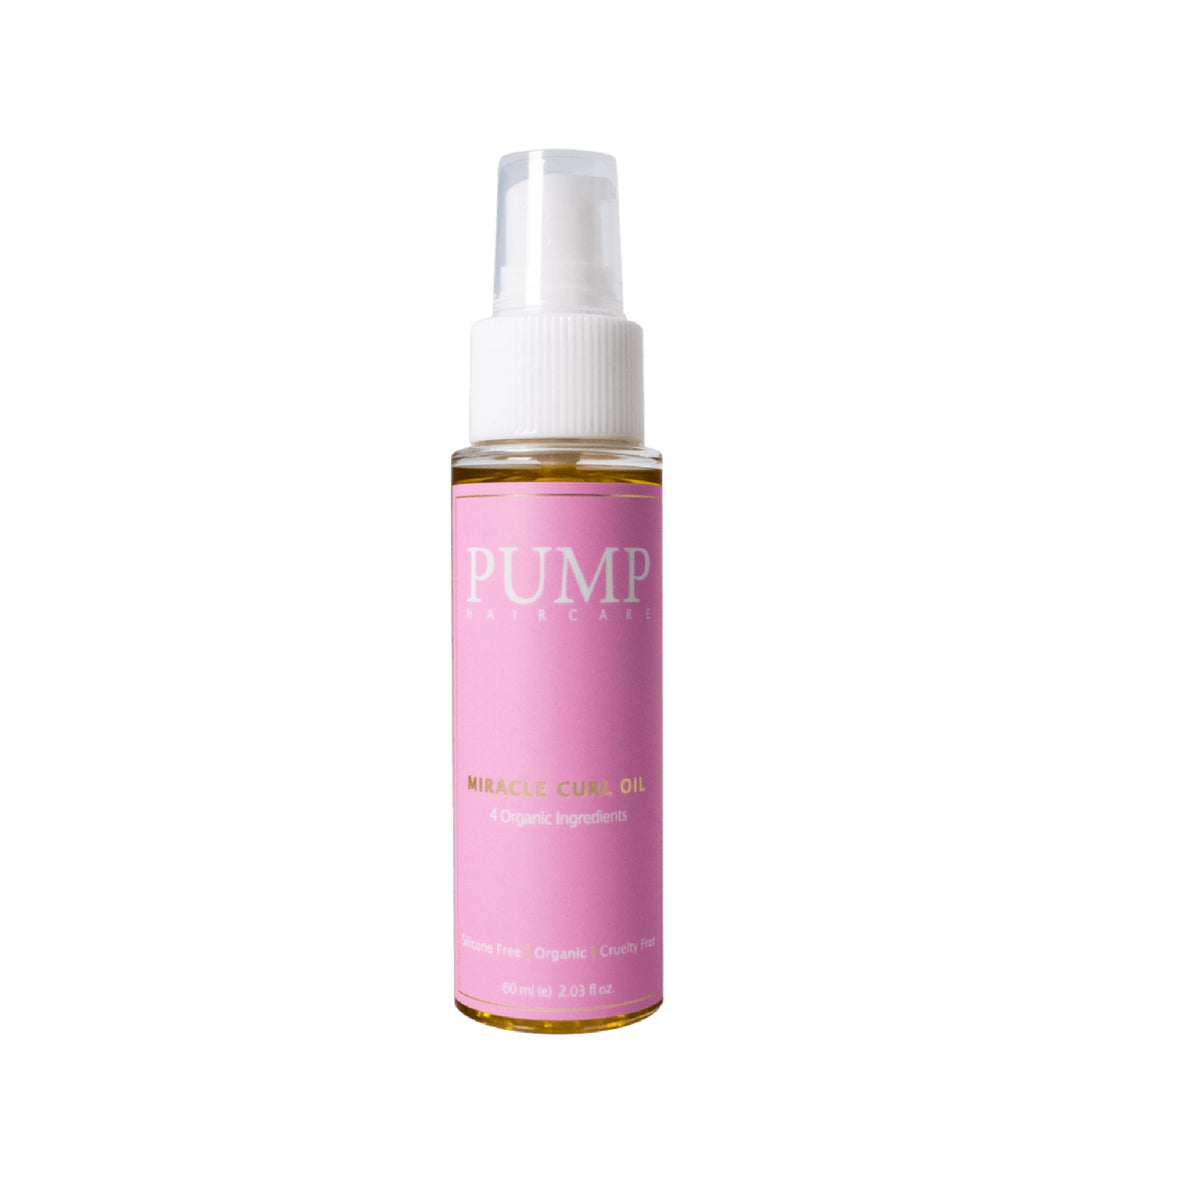 Pump Miracle Curl Oil - Haircare Superstore